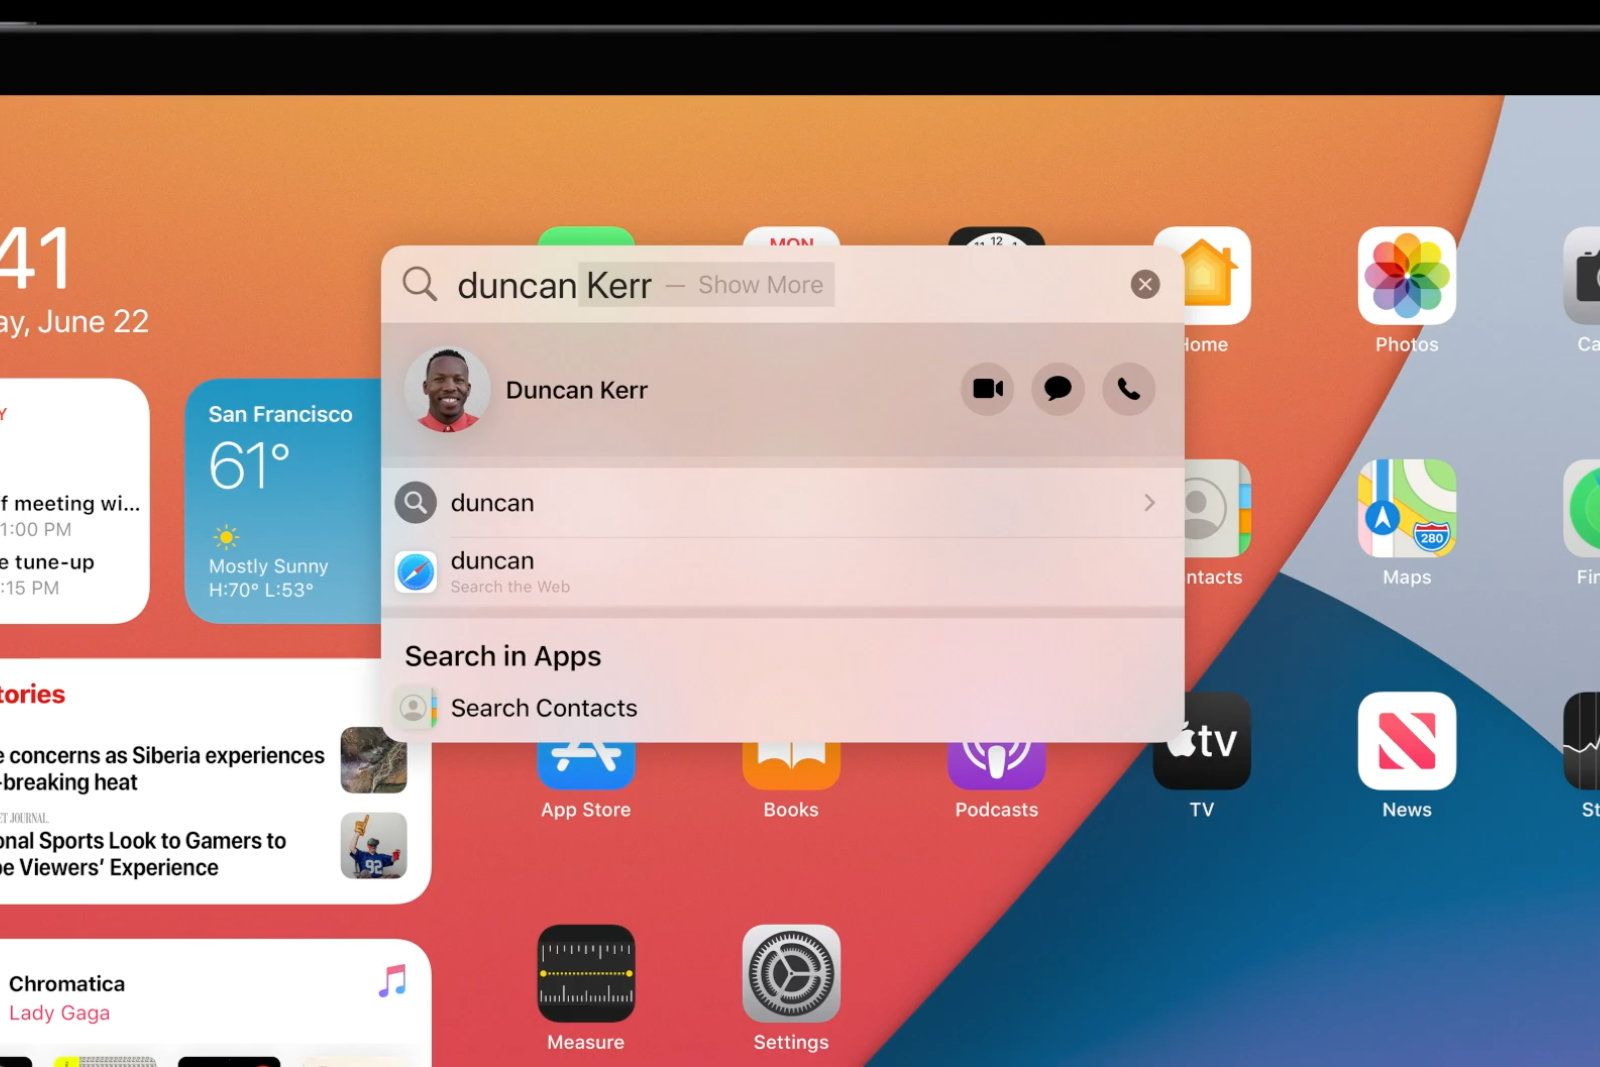 iPadOS 14 announced Universal search and handwriting recognition added image 1